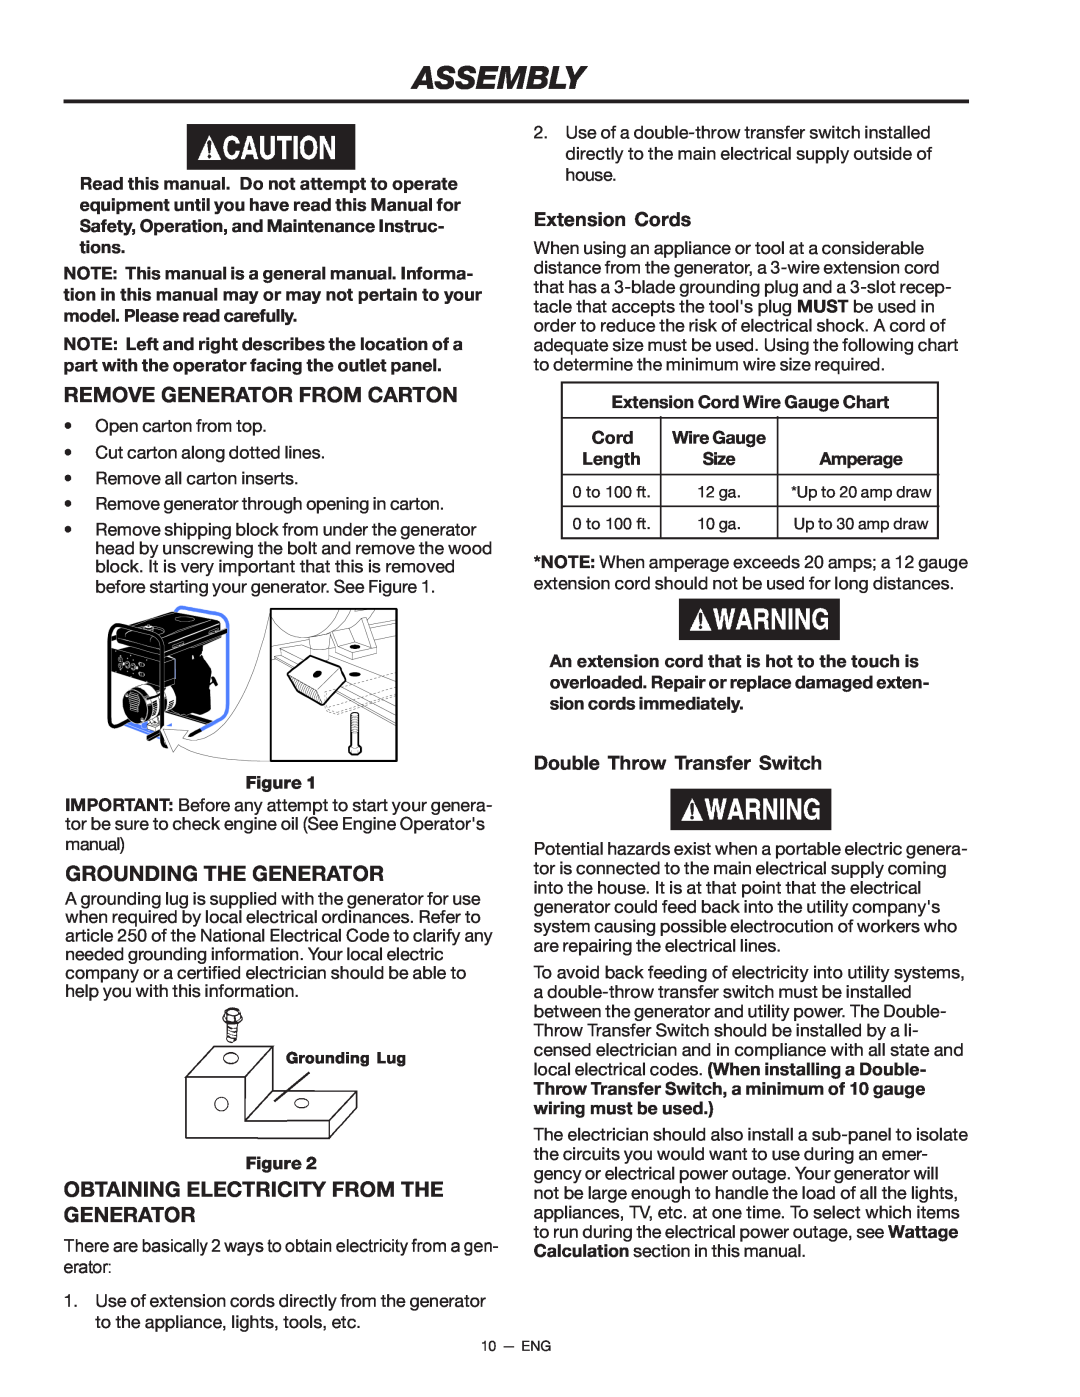 Porter-Cable D21679-008-0 instruction manual Assembly, Remove Generator From Carton, Grounding The Generator 